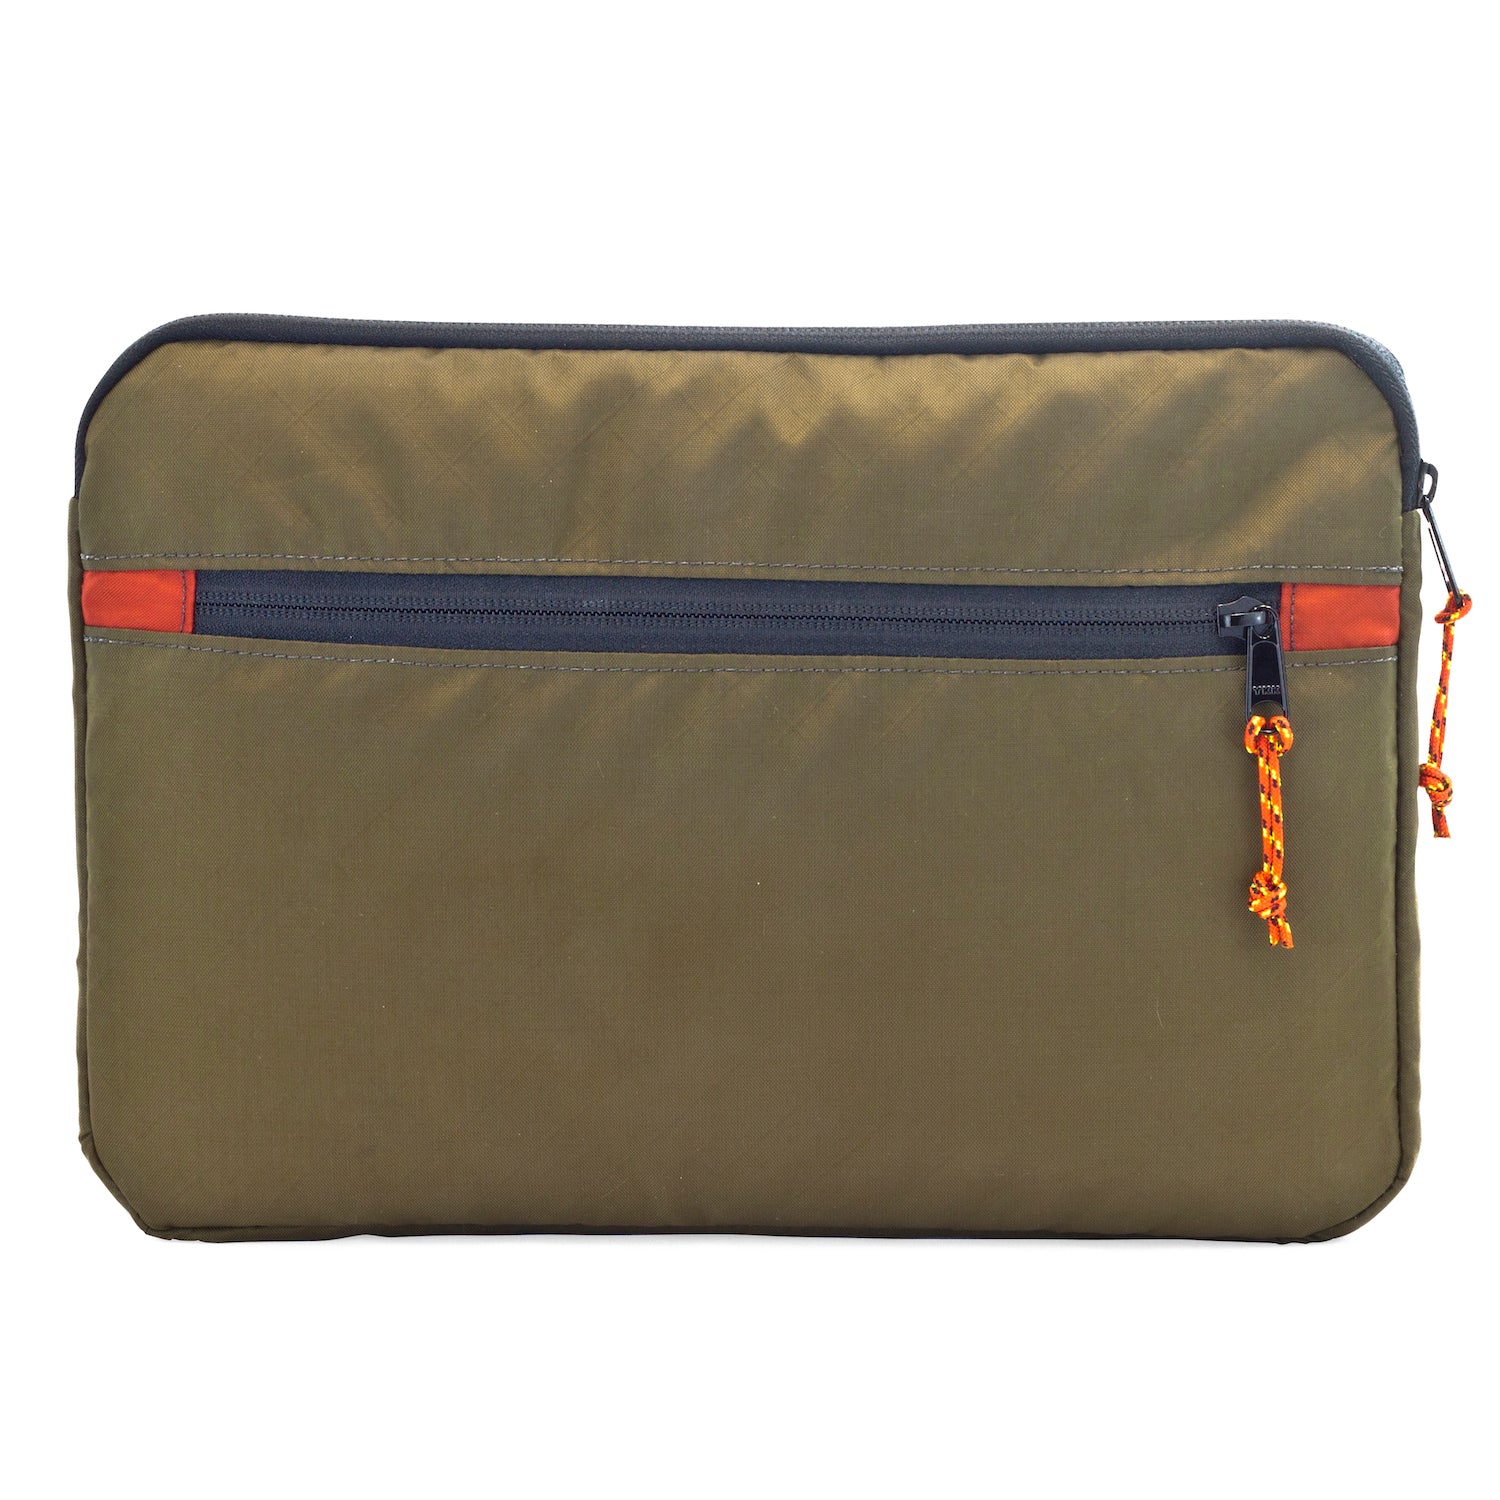 Bag-all Laptop Case 13 with Charger Pocket